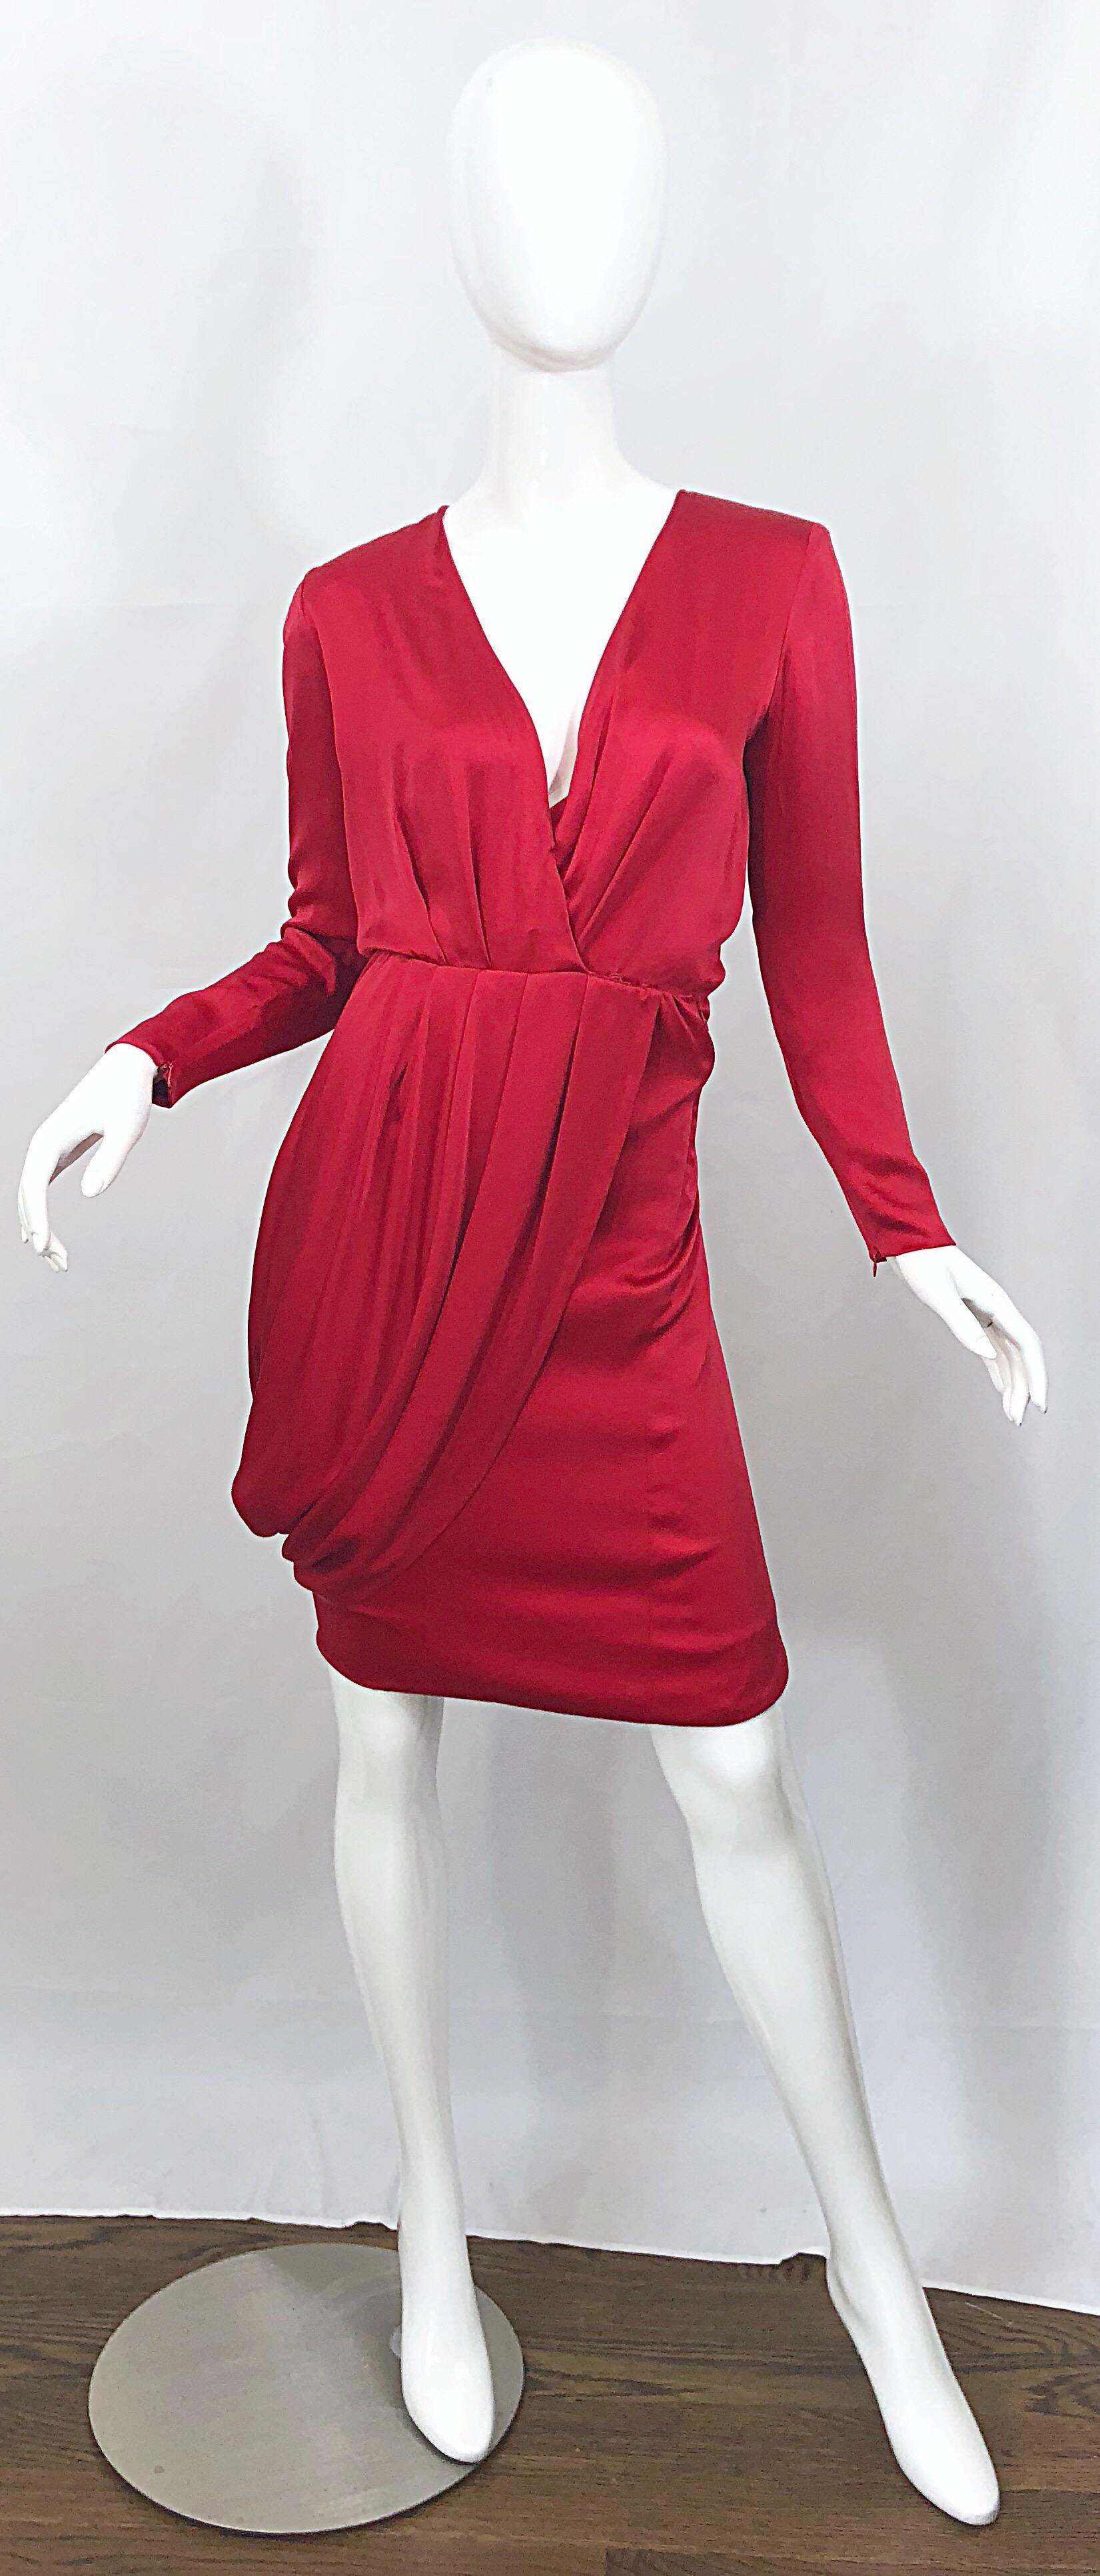 Remarkable and rare vintage GIVENCHY COUTURE, by ALEXANDER MCQUEEN lipstick red plunging cape dress! From the A/W 1998 collection. Sexy, yet not overly, this gem is extremely well made, with heavy attention to detail. Most of the workmanship was